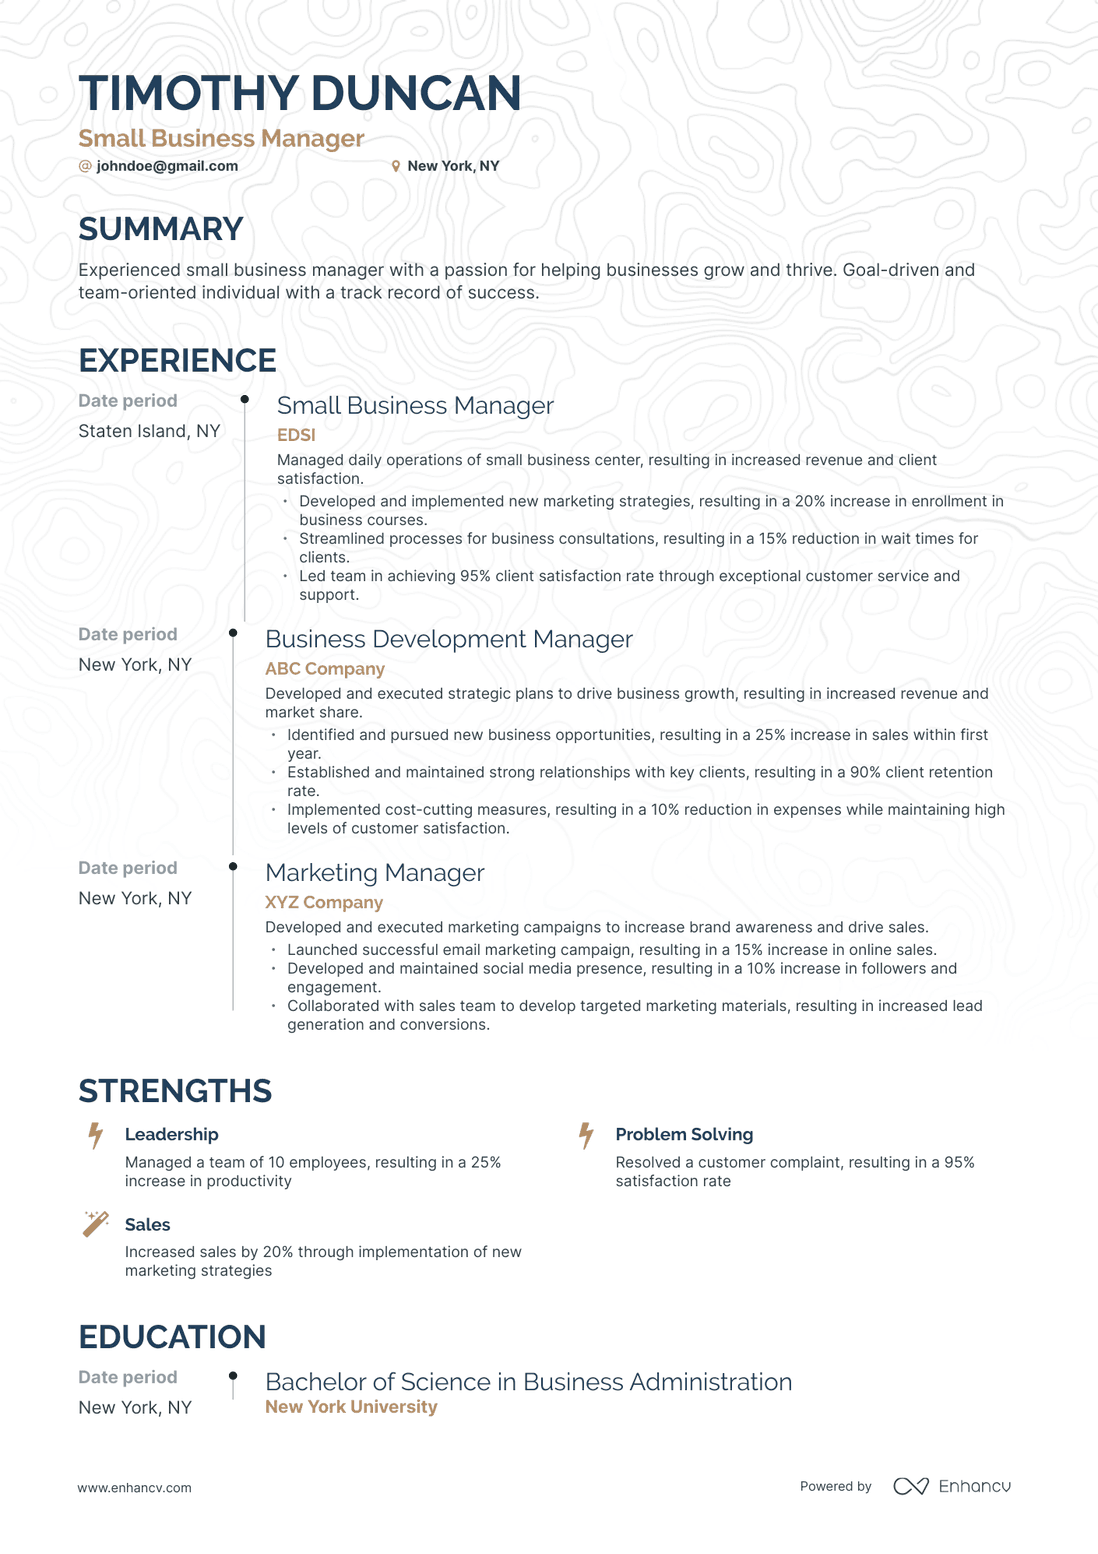 Timeline Small Business Manager Resume Template